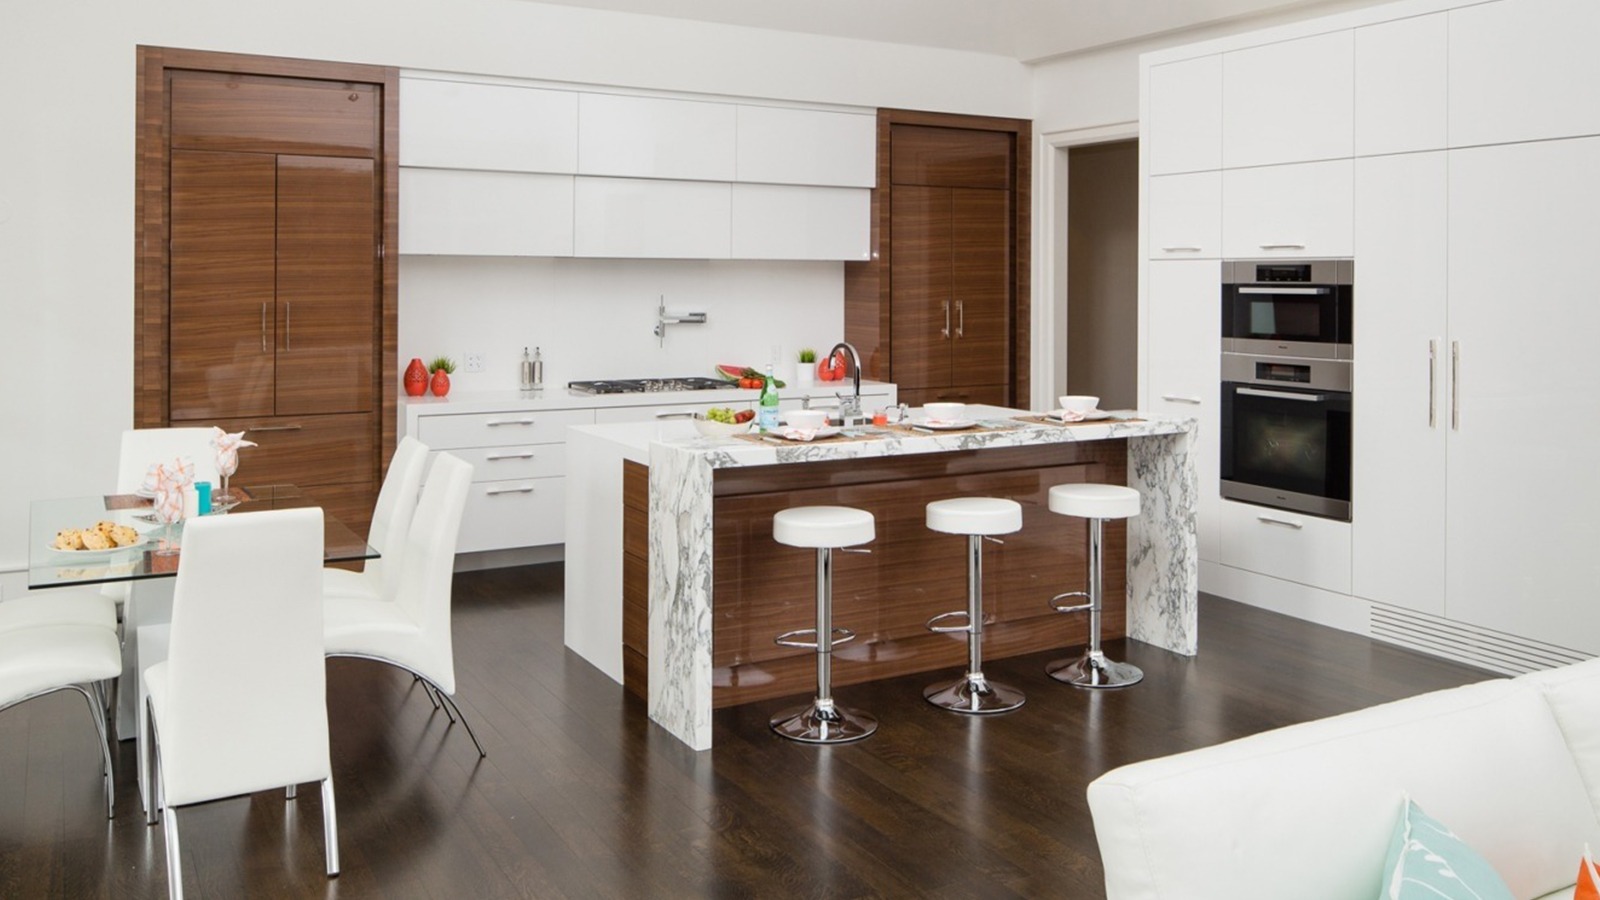 Modern kitchen with white countertop, wood island and hardwood floor.